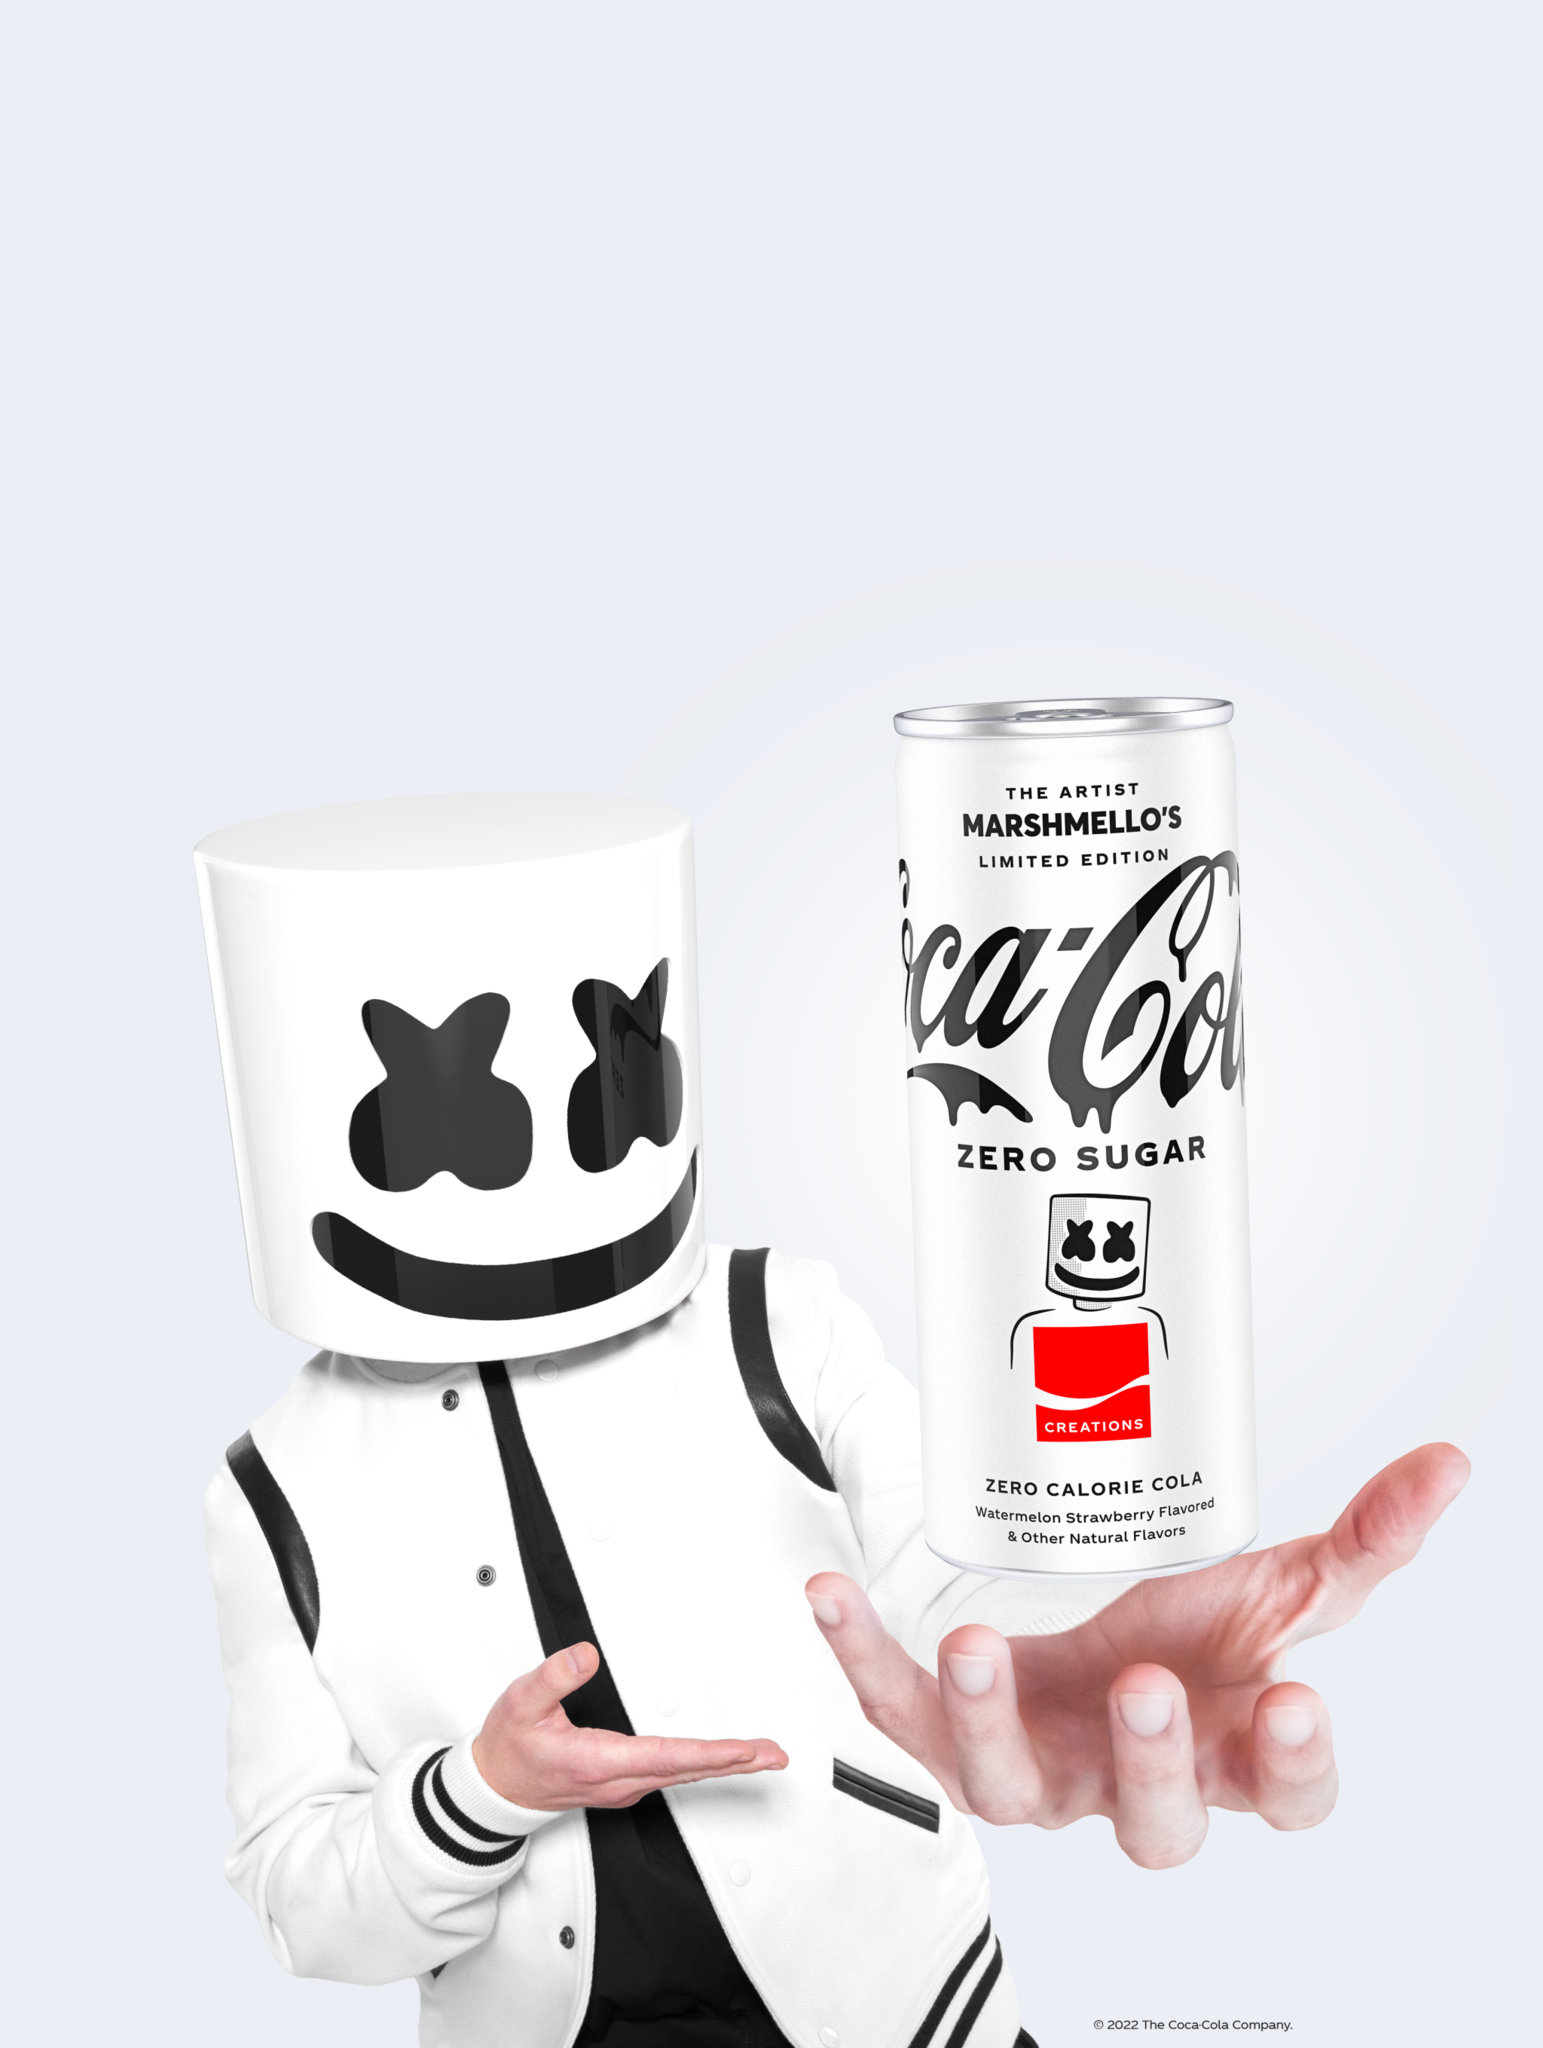 Marshmello holding a can of the new flavor